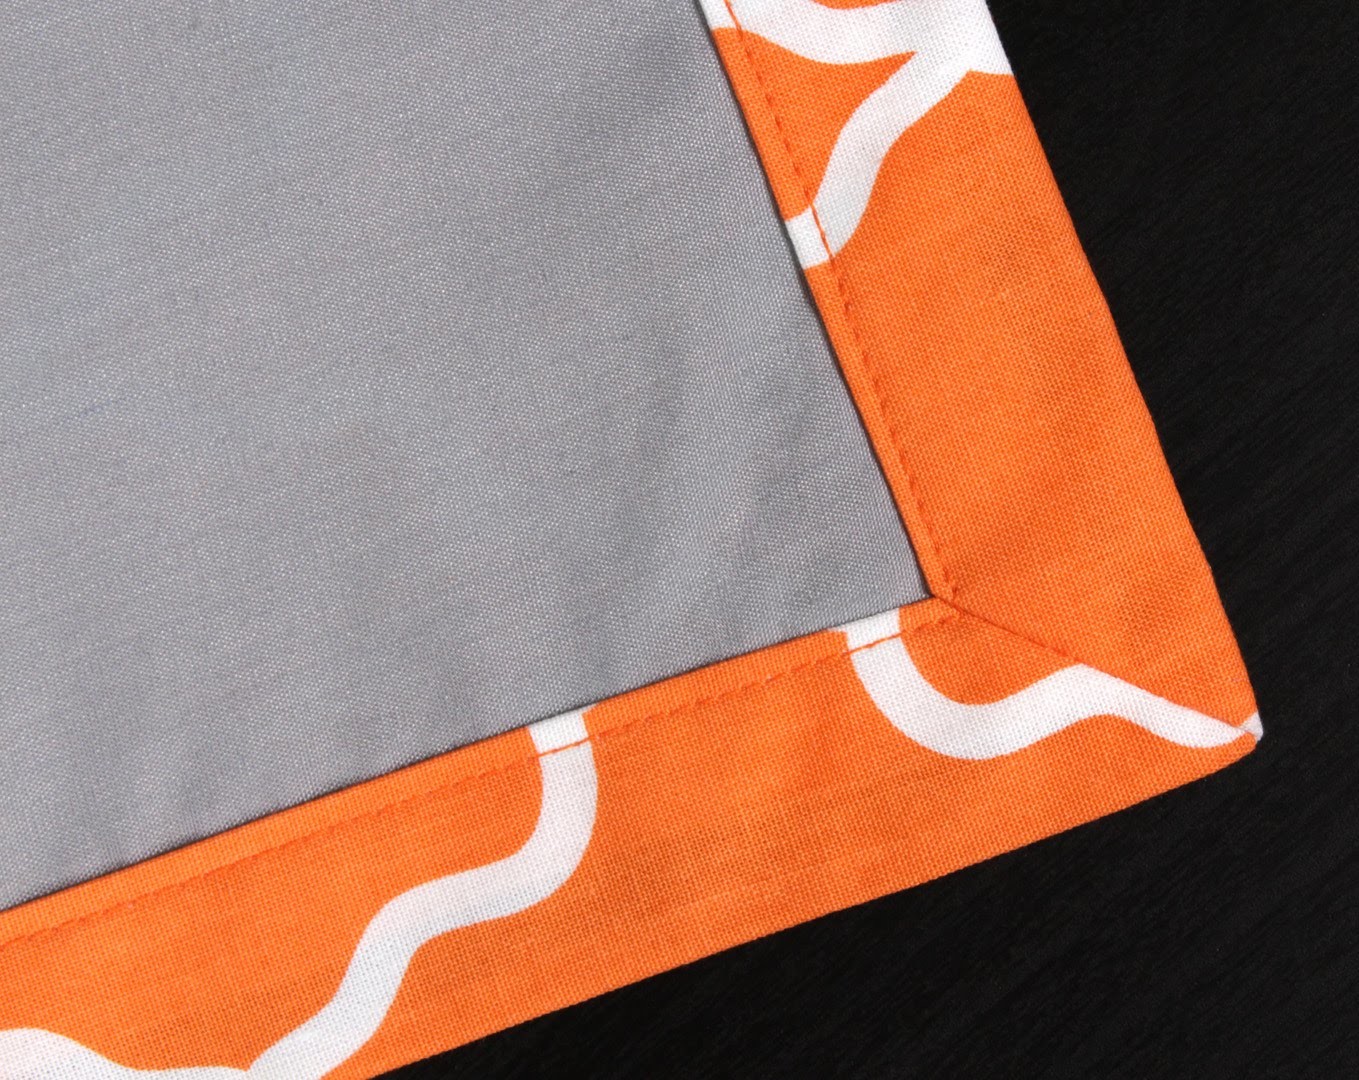 How to Sew a Mitered Corner